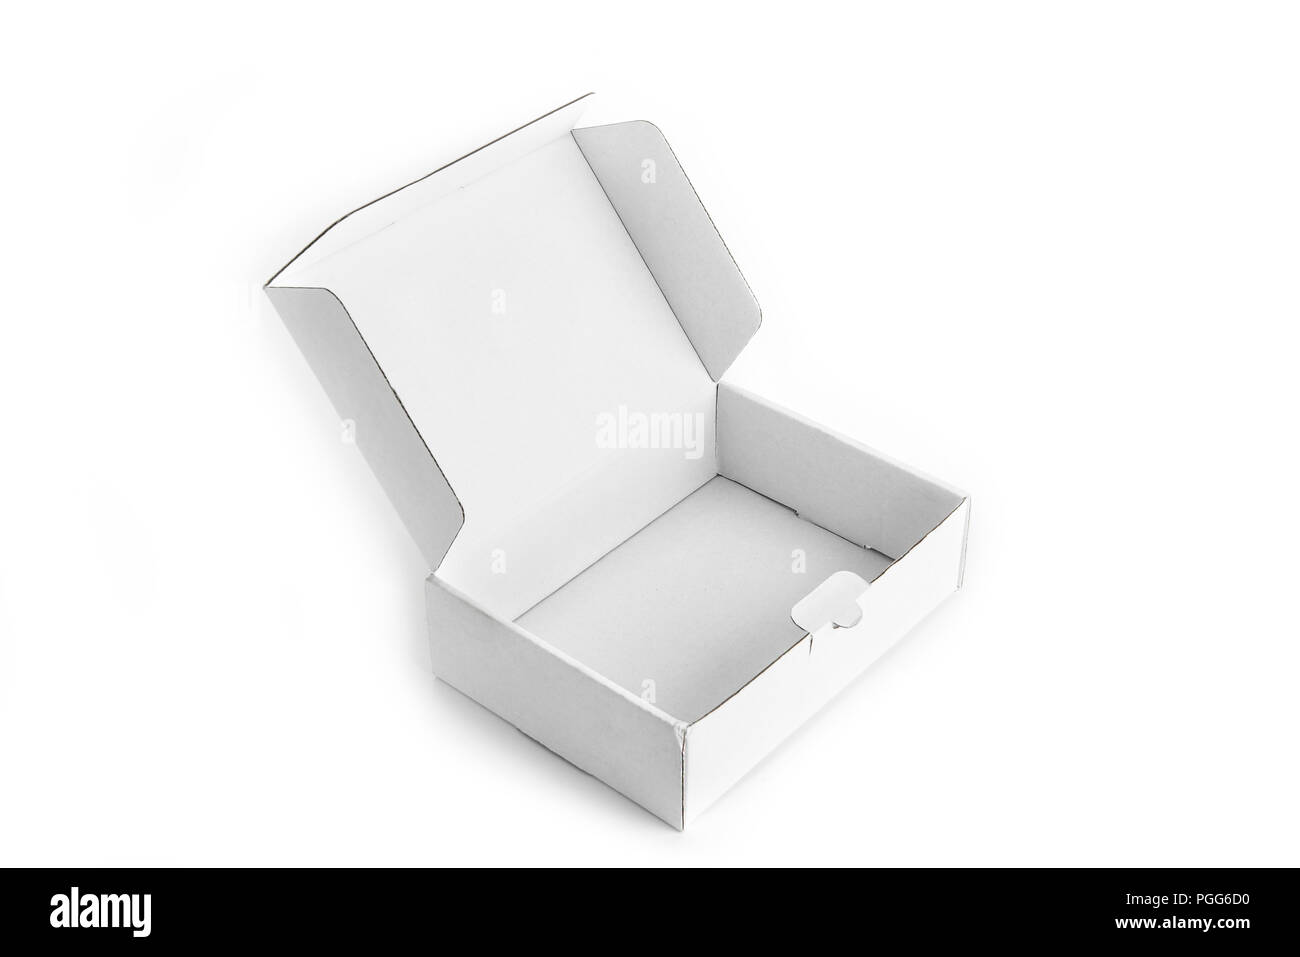 Cardboard paper box on a white background Stock Photo